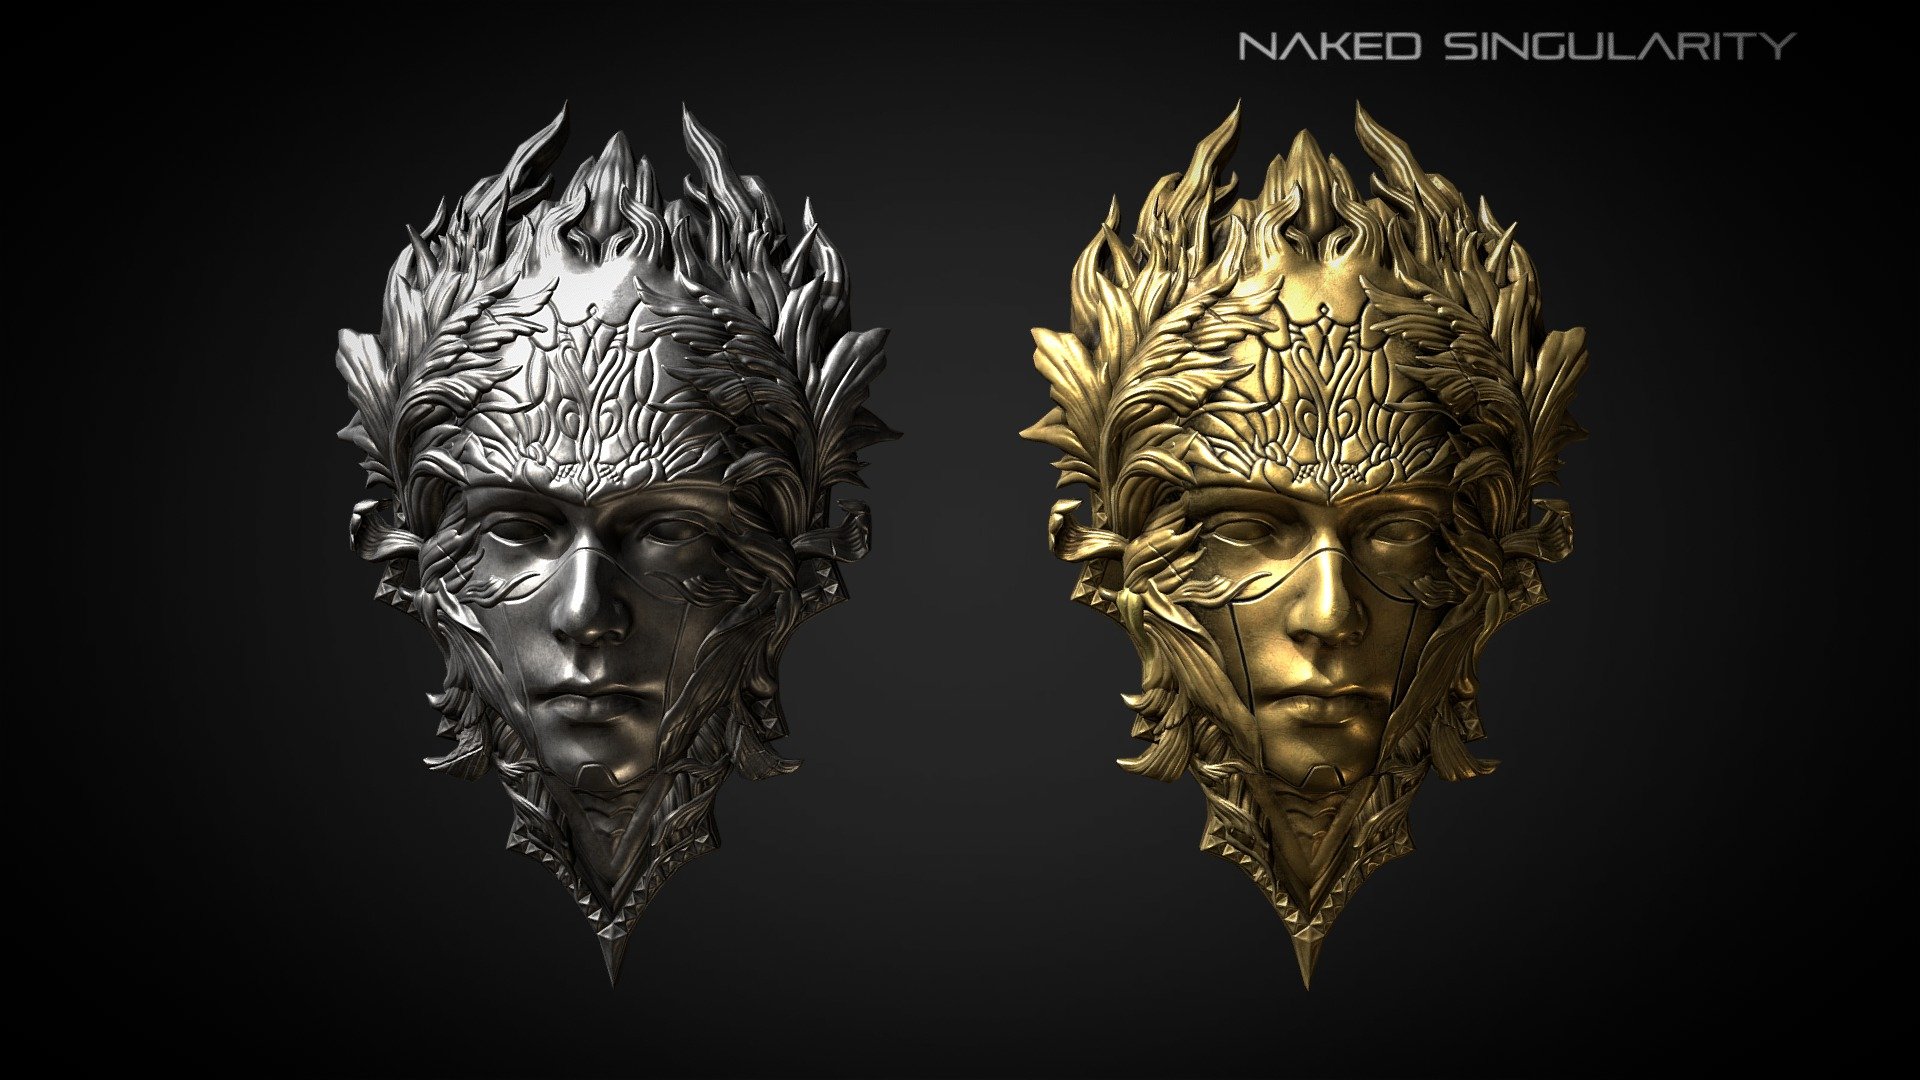 God Face Shield | Medieval dark fantasy weapon | 4K | Low poly

Original concept by Naked Singularity. Inspire by Dark Souls triology and Elden Ring




High quality low poly model.

4K High resolution texture.

Real world scale.

PBR texturing.

Check out other Dark fantasy game asset

Customer support: nakedsingularity.studio@gmail.com

Follow us on: Youtube | Facebook | Instagram | Twitter | Artstation - God Face Shield | Medieval dark fantasy weapon - Buy Royalty Free 3D model by Naked Singularity Studio (@nakedsingularity) 3d model